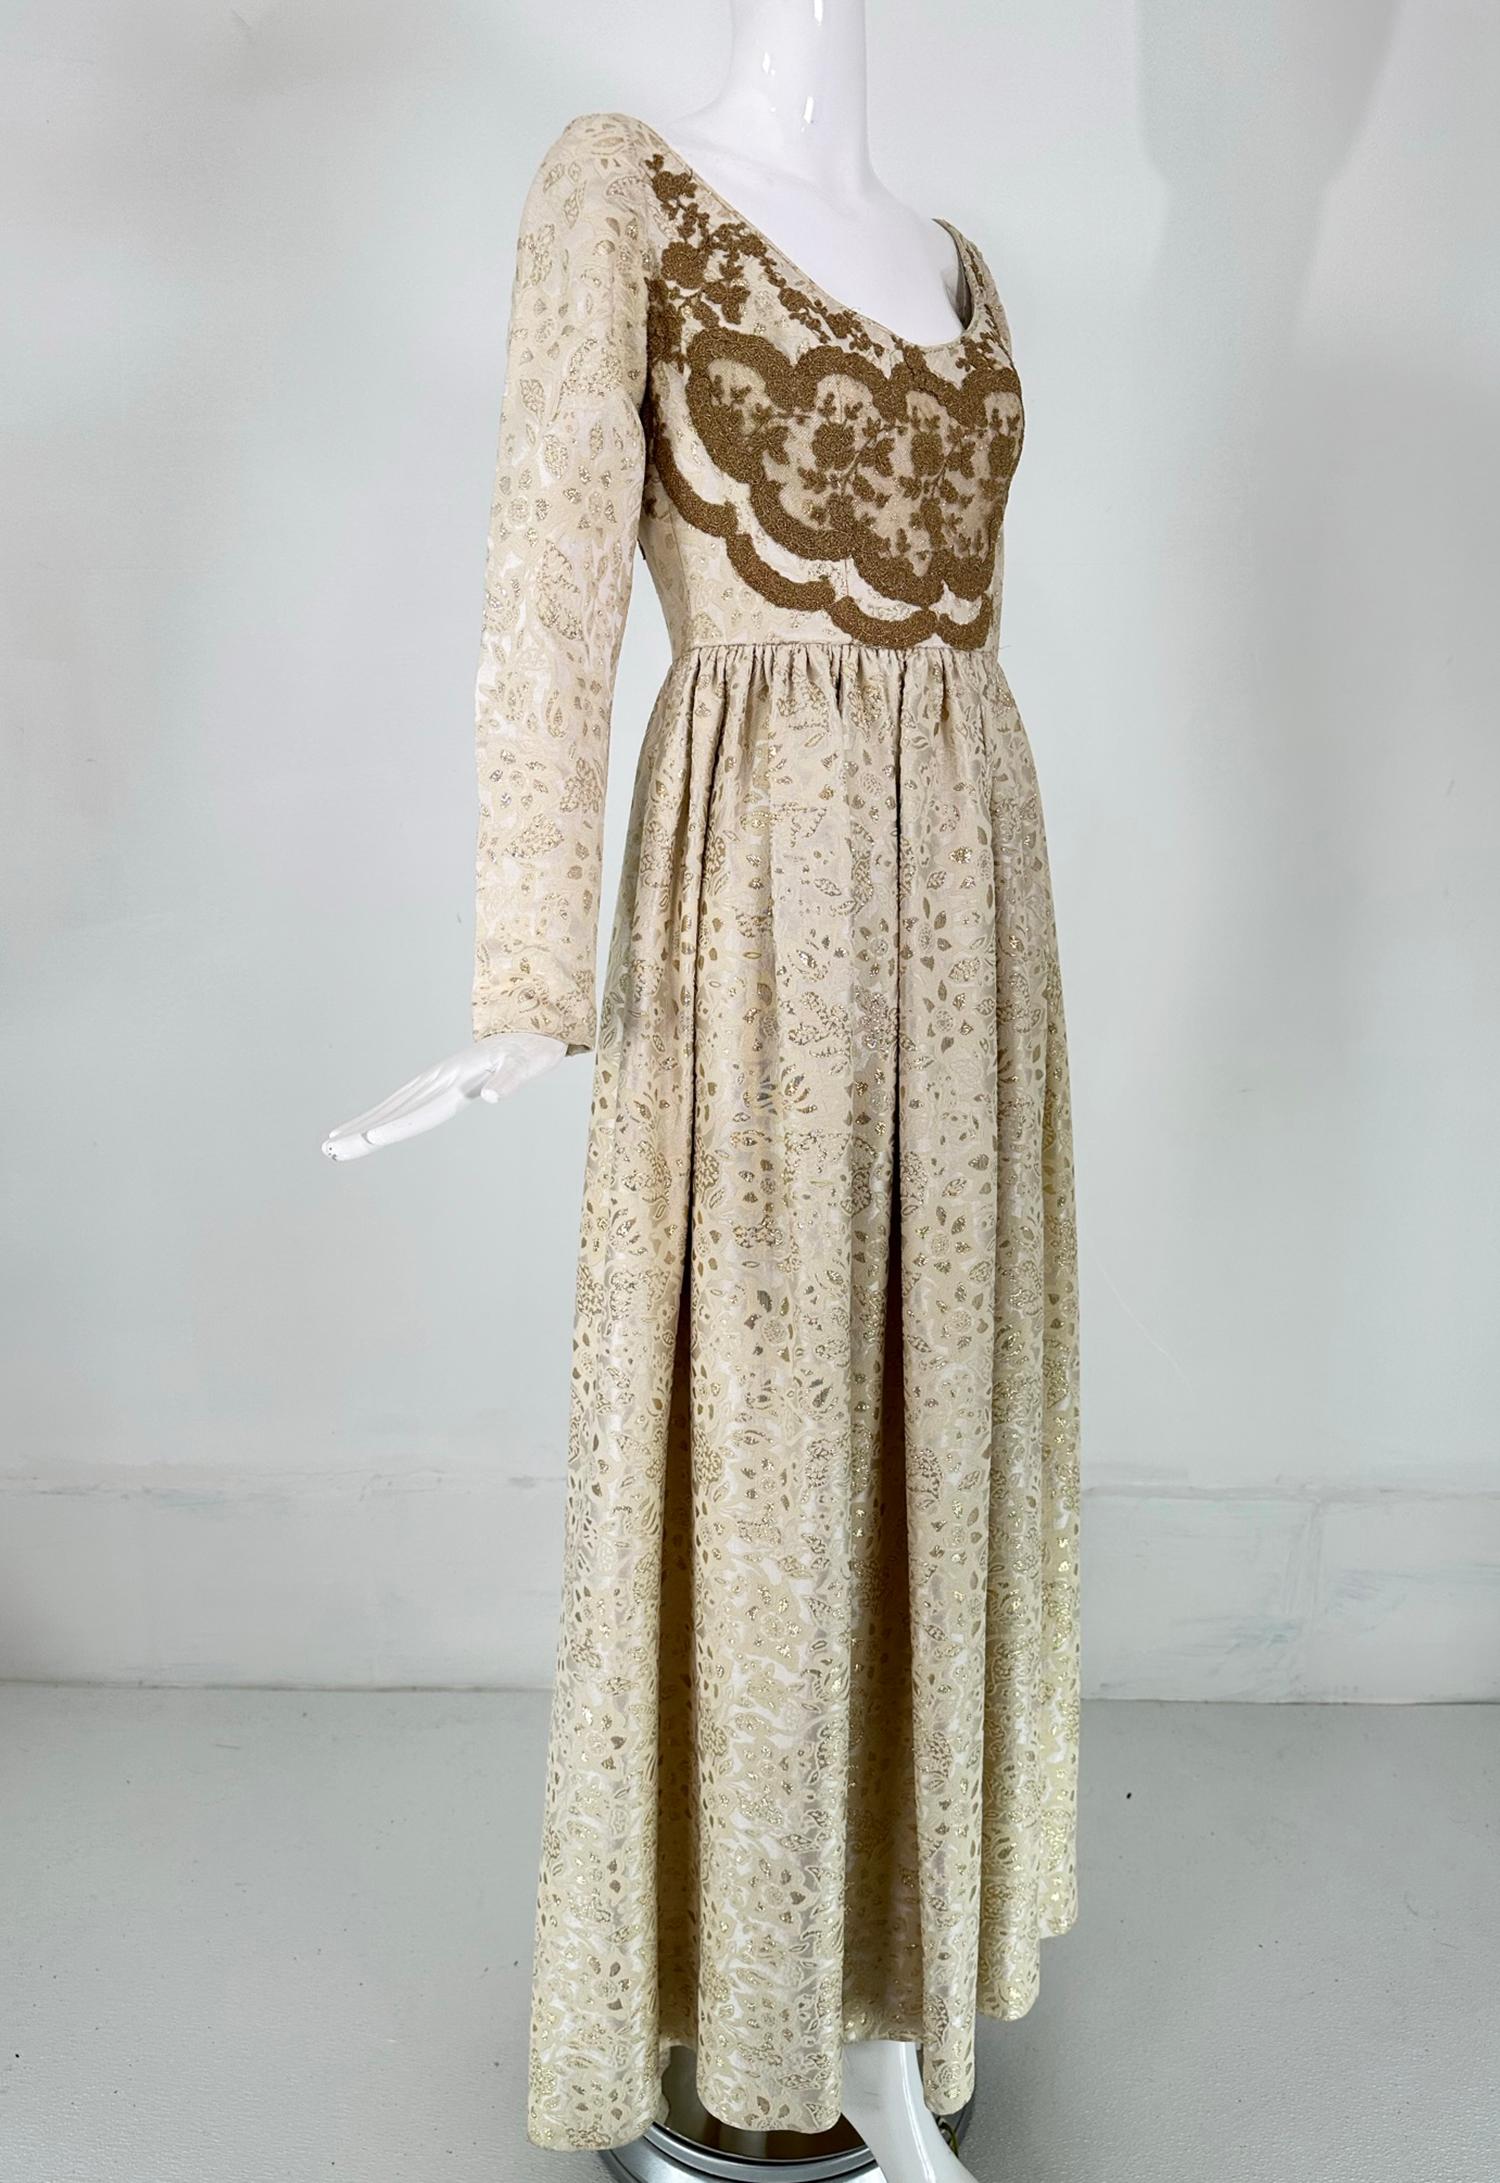 Irene Galitizne Couture, Renaissance style evening gown in cream & white with gold metallic brocade from the 1970s. A romantic gown with a beautiful neckline and bodice front applique design. Low scooped neckline, the bodice is appliqued with a gold